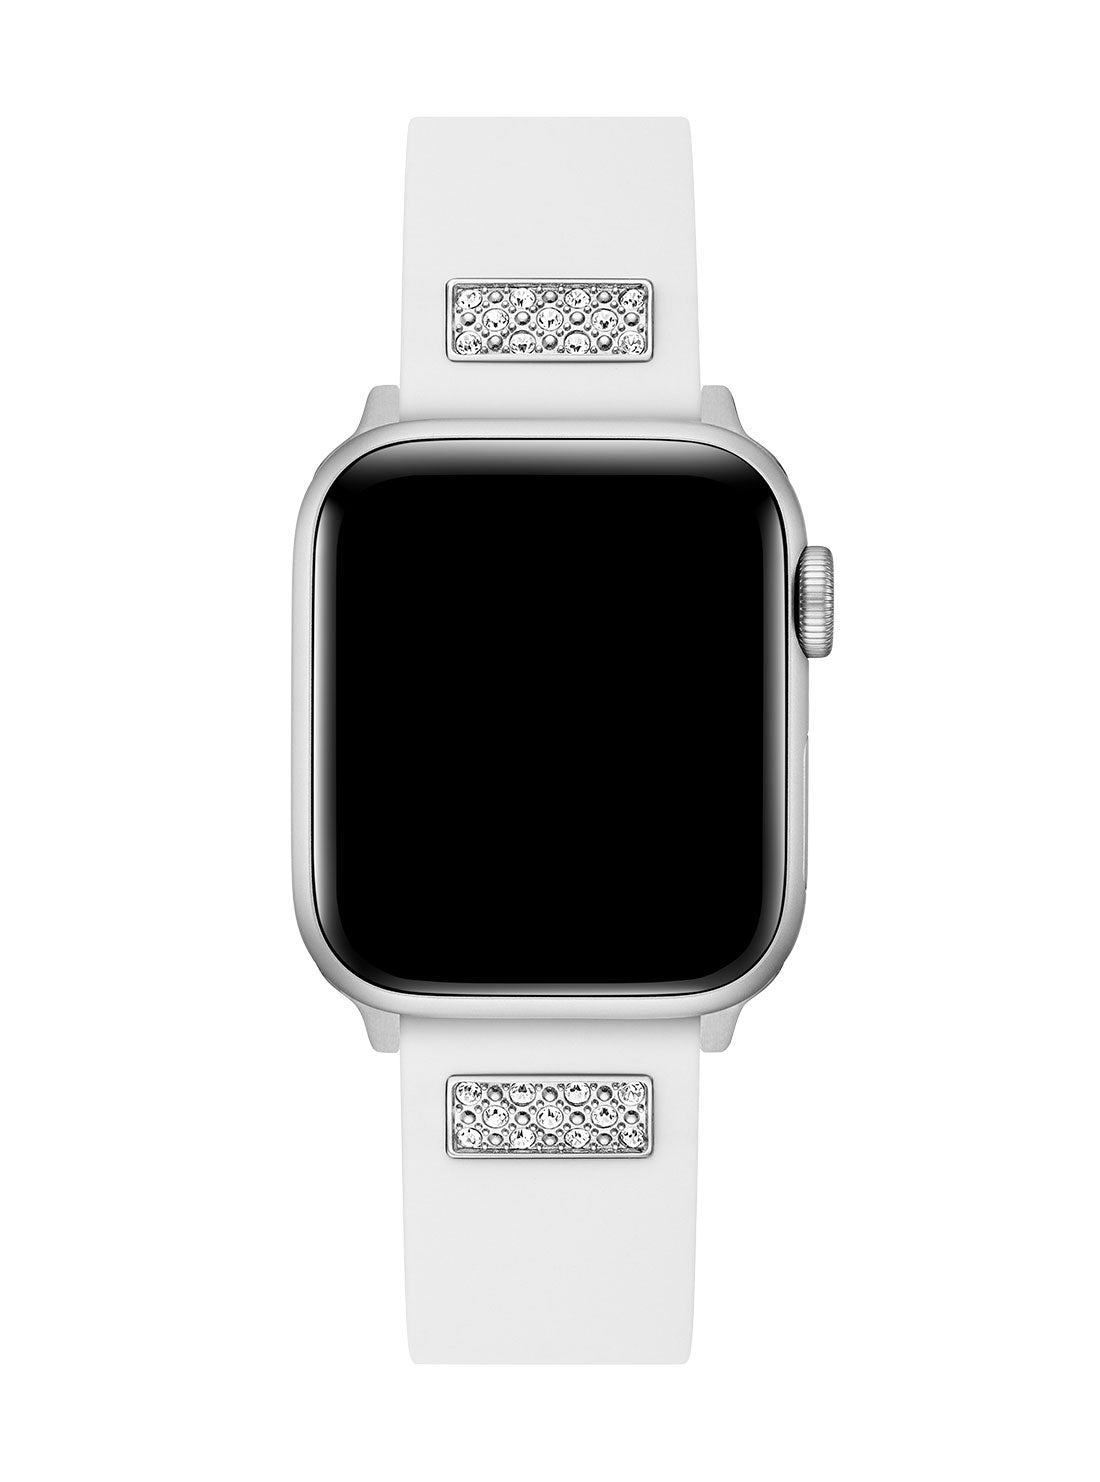 GUESS Women's White Frontier Silicone Crystal Apple Watch Strap CS2005S1 Front View